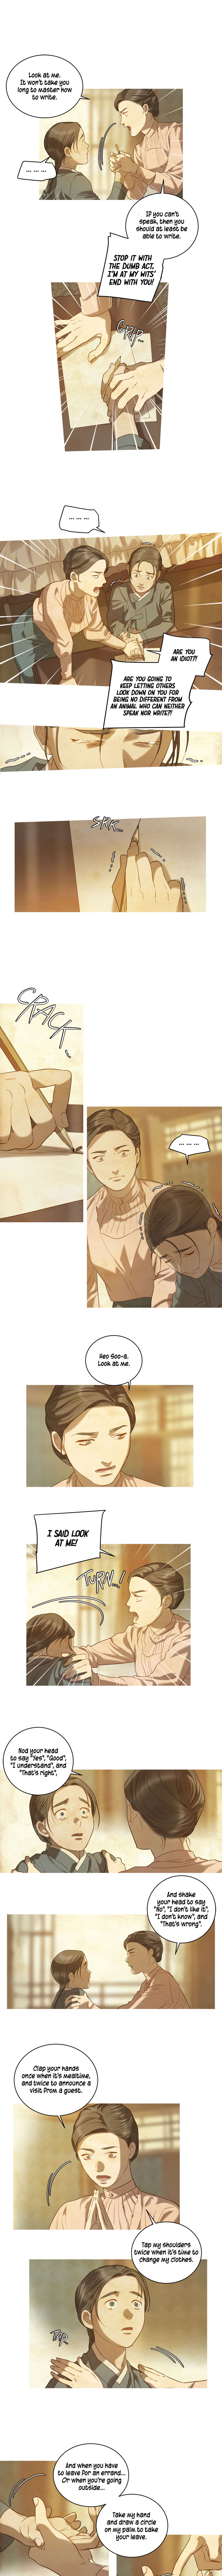 Gorae Byul - The Gyeongseong Mermaid - Chapter 11 Page 6